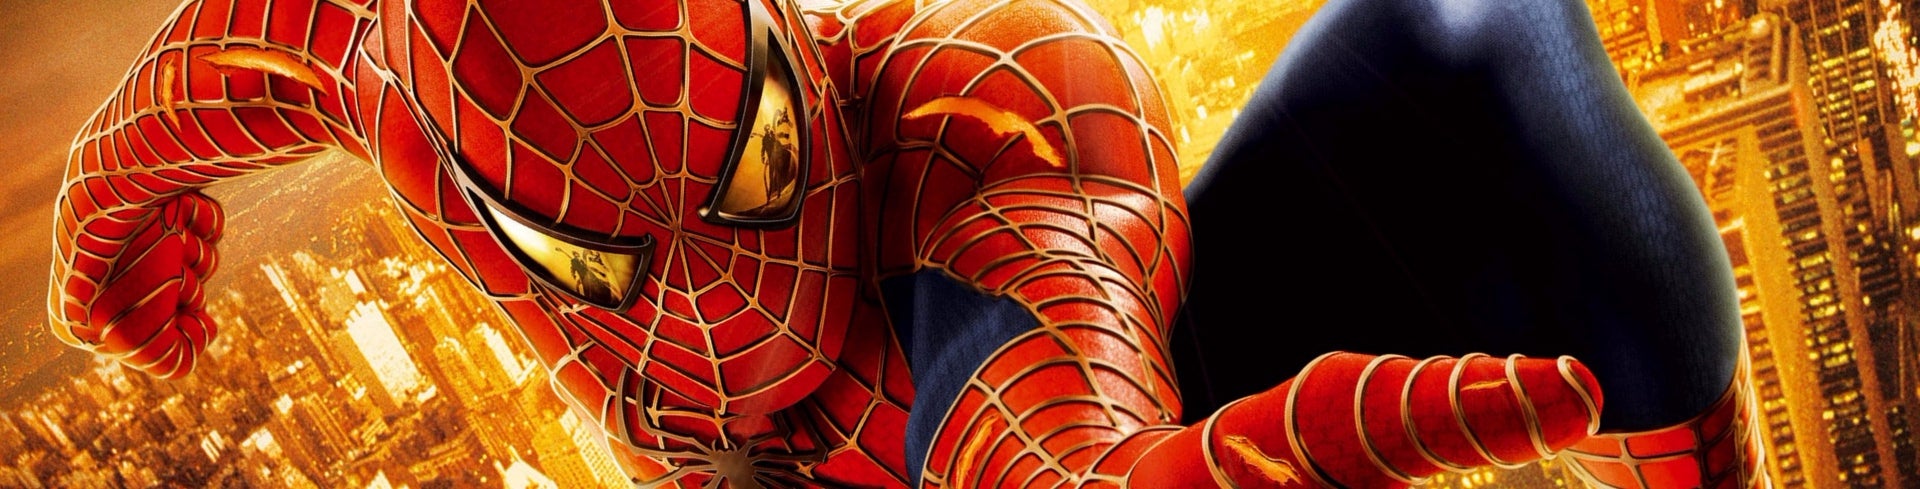 Image for 13 years later, Spider-Man 2's swinging has never been bettered - here's its story